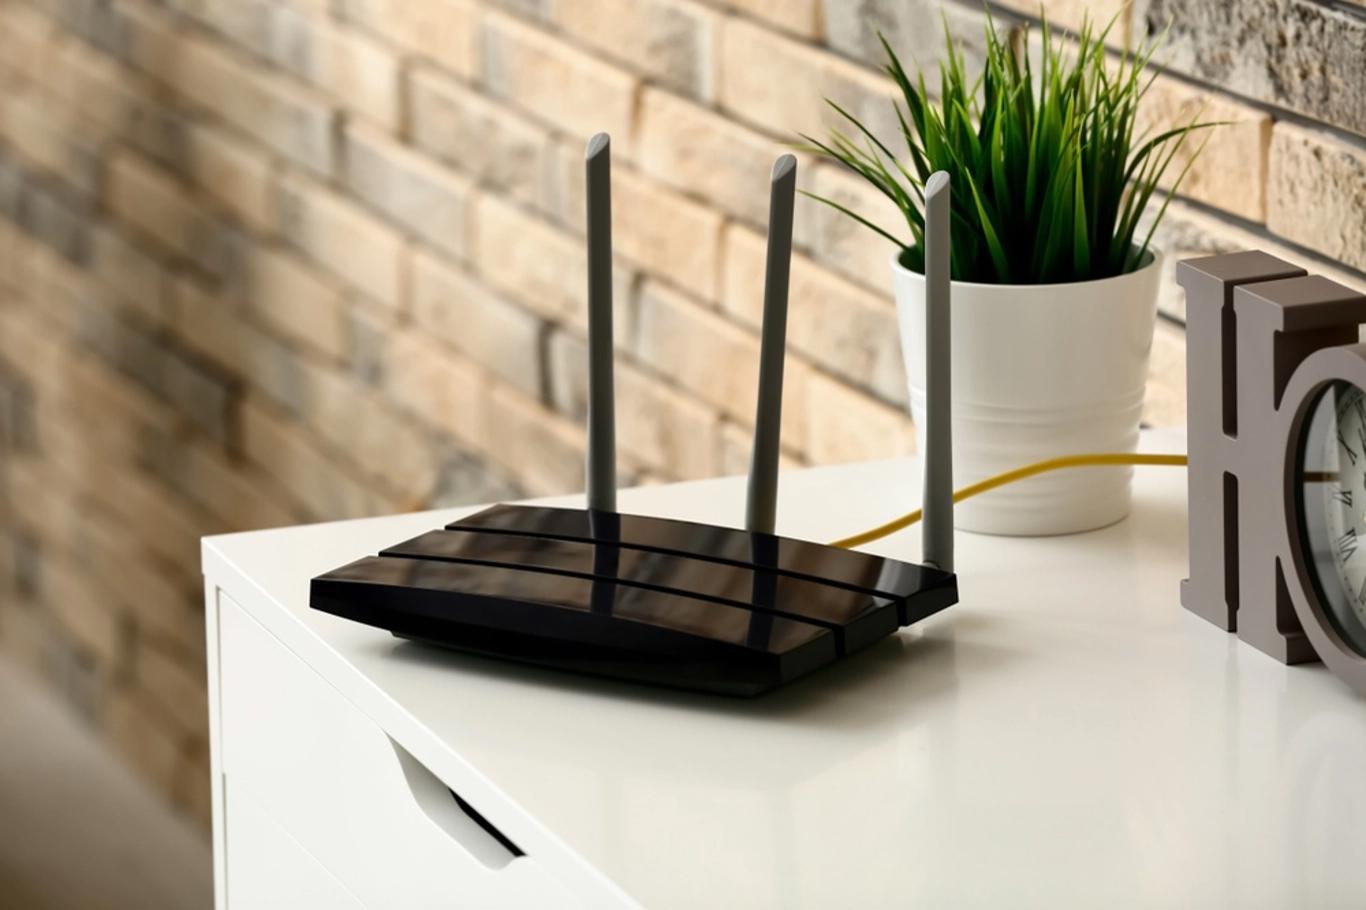 How To Locate A Wi-Fi Router